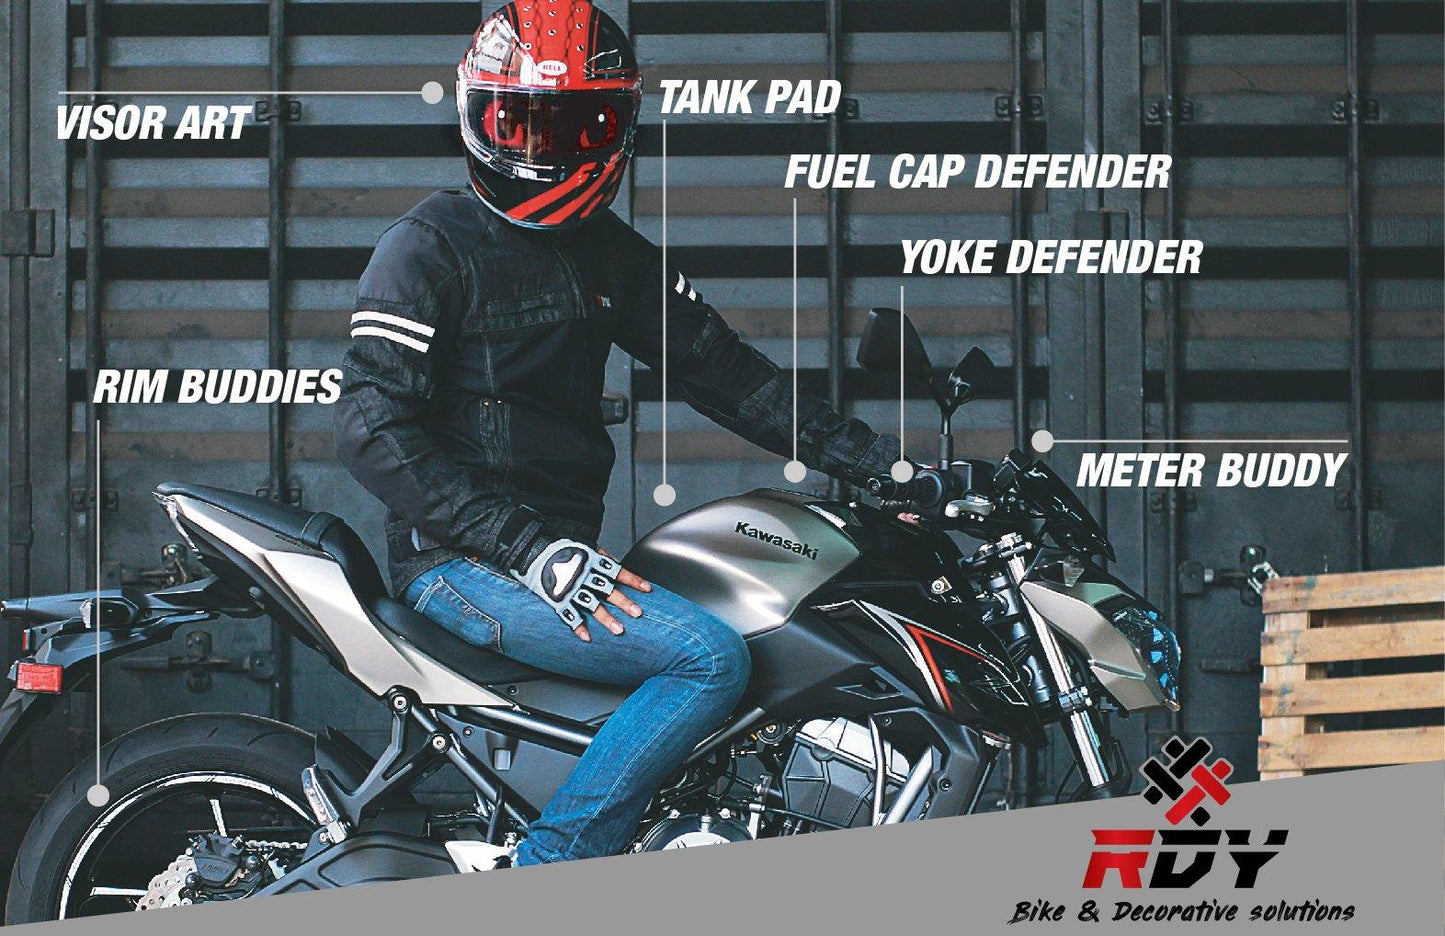 RDY Yoke Defender fits for BMW R1100 / R1150 / R1200RS ('93-'01) / ('01-'05) - Durian Bikers